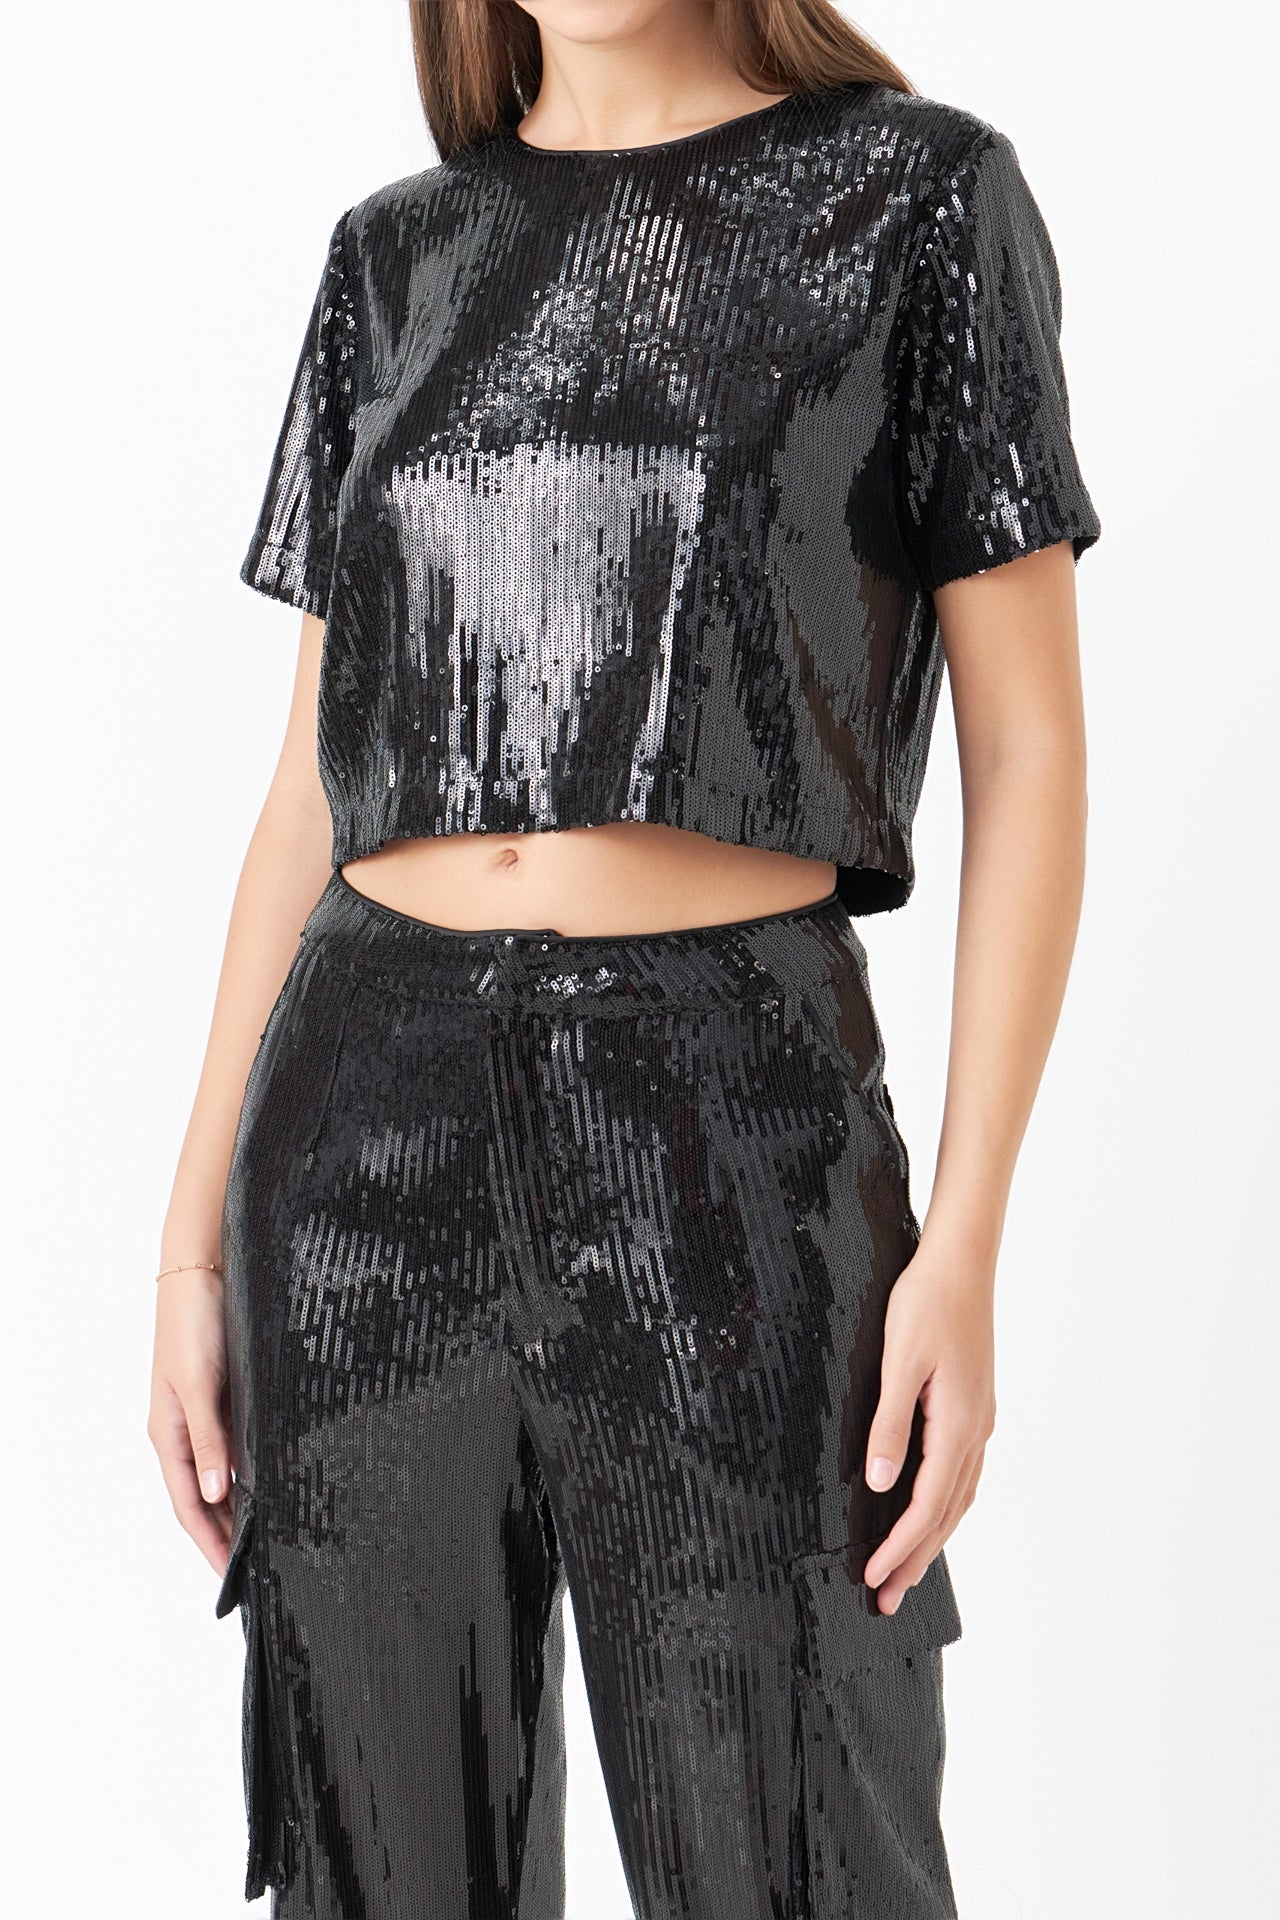 ENDLESS ROSE - Sequins Cropped T Top - T-SHIRTS available at Objectrare